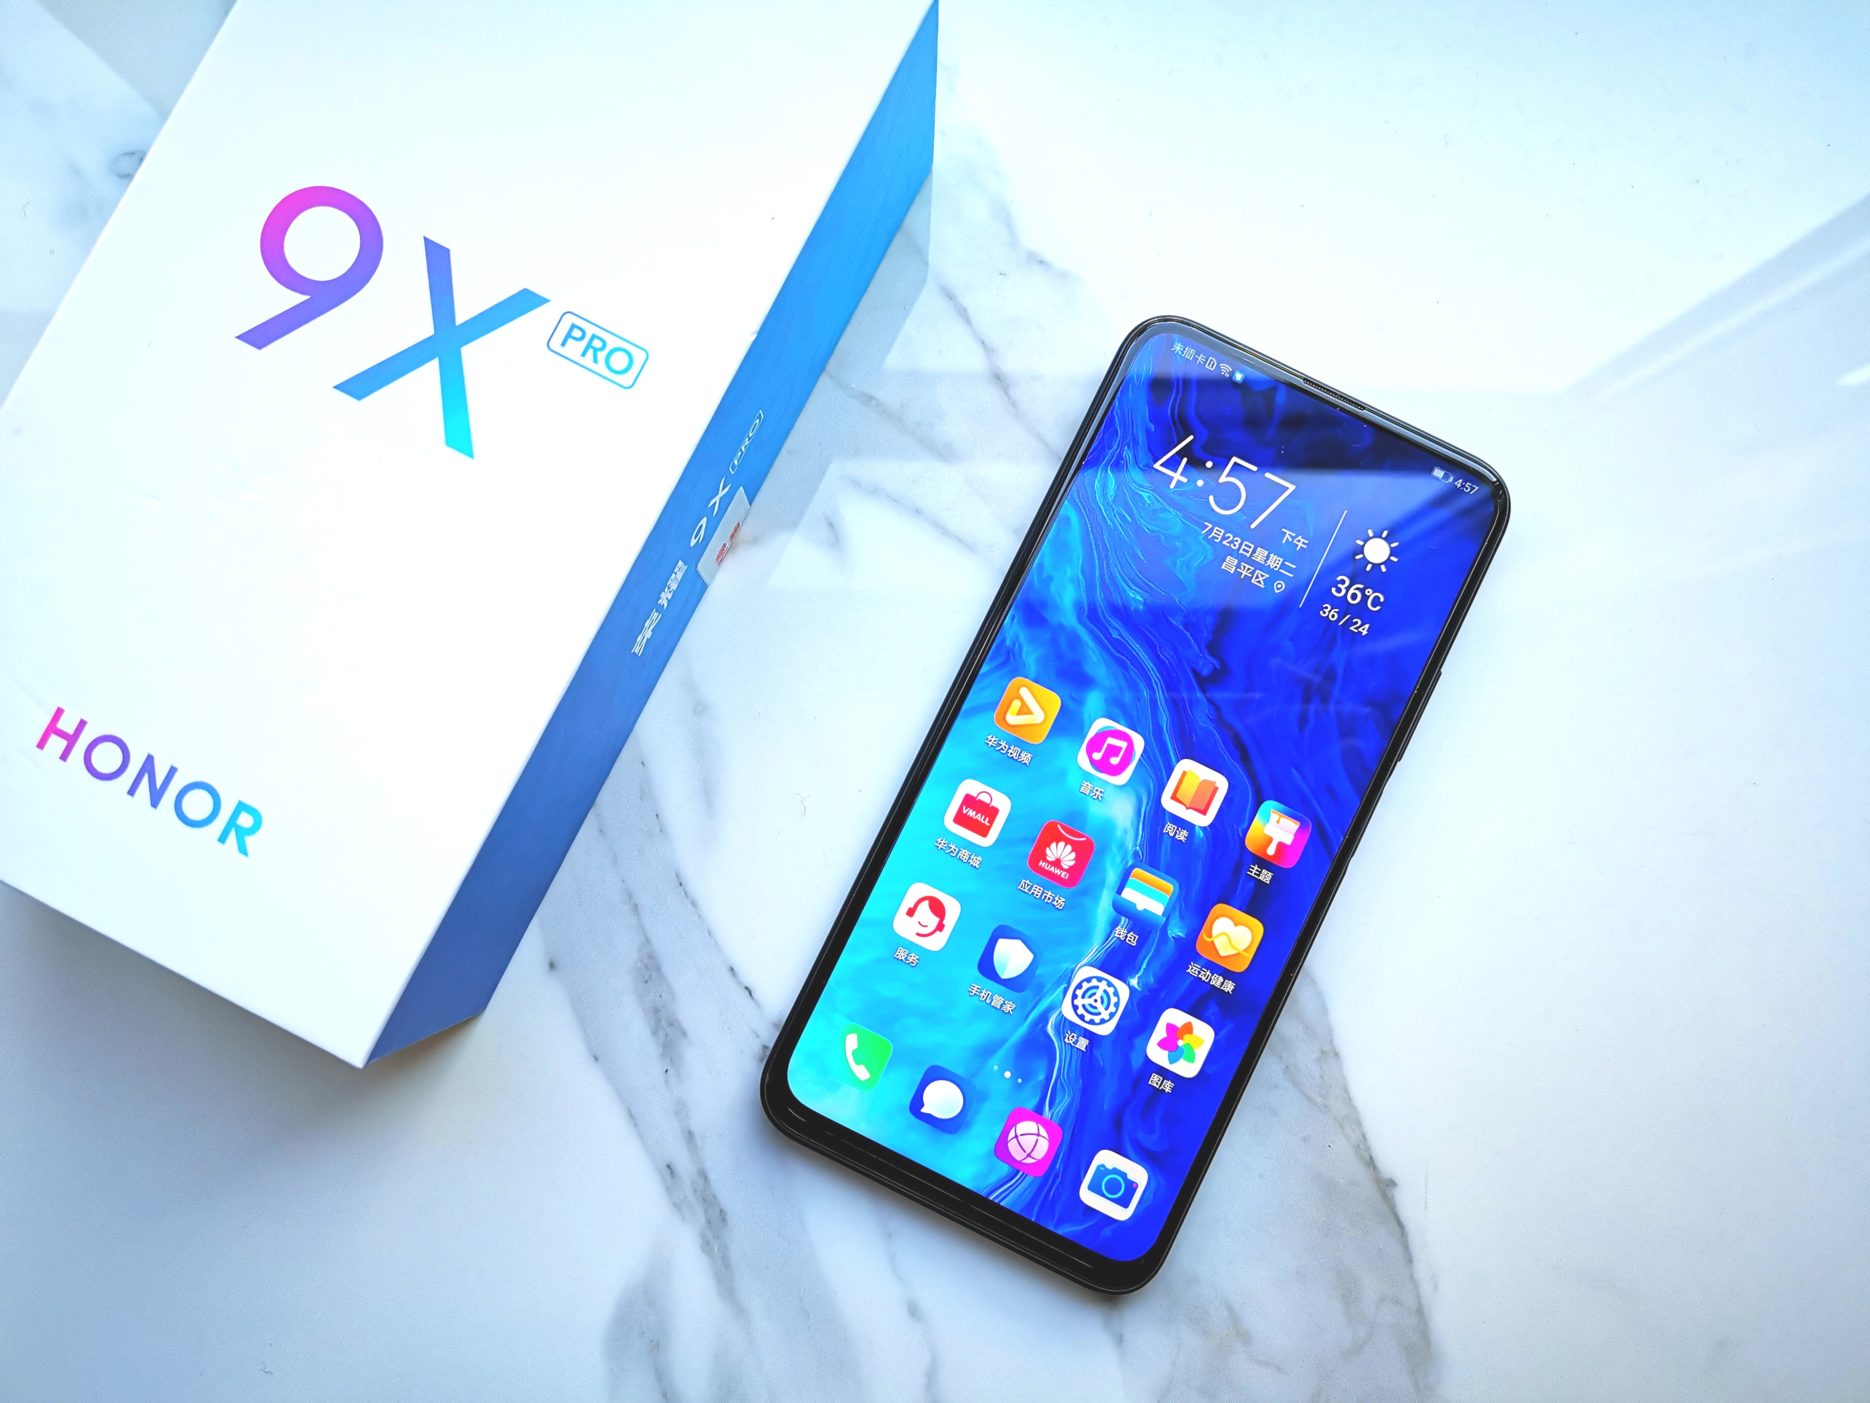 Smartphone brand Honor sold by Huawei